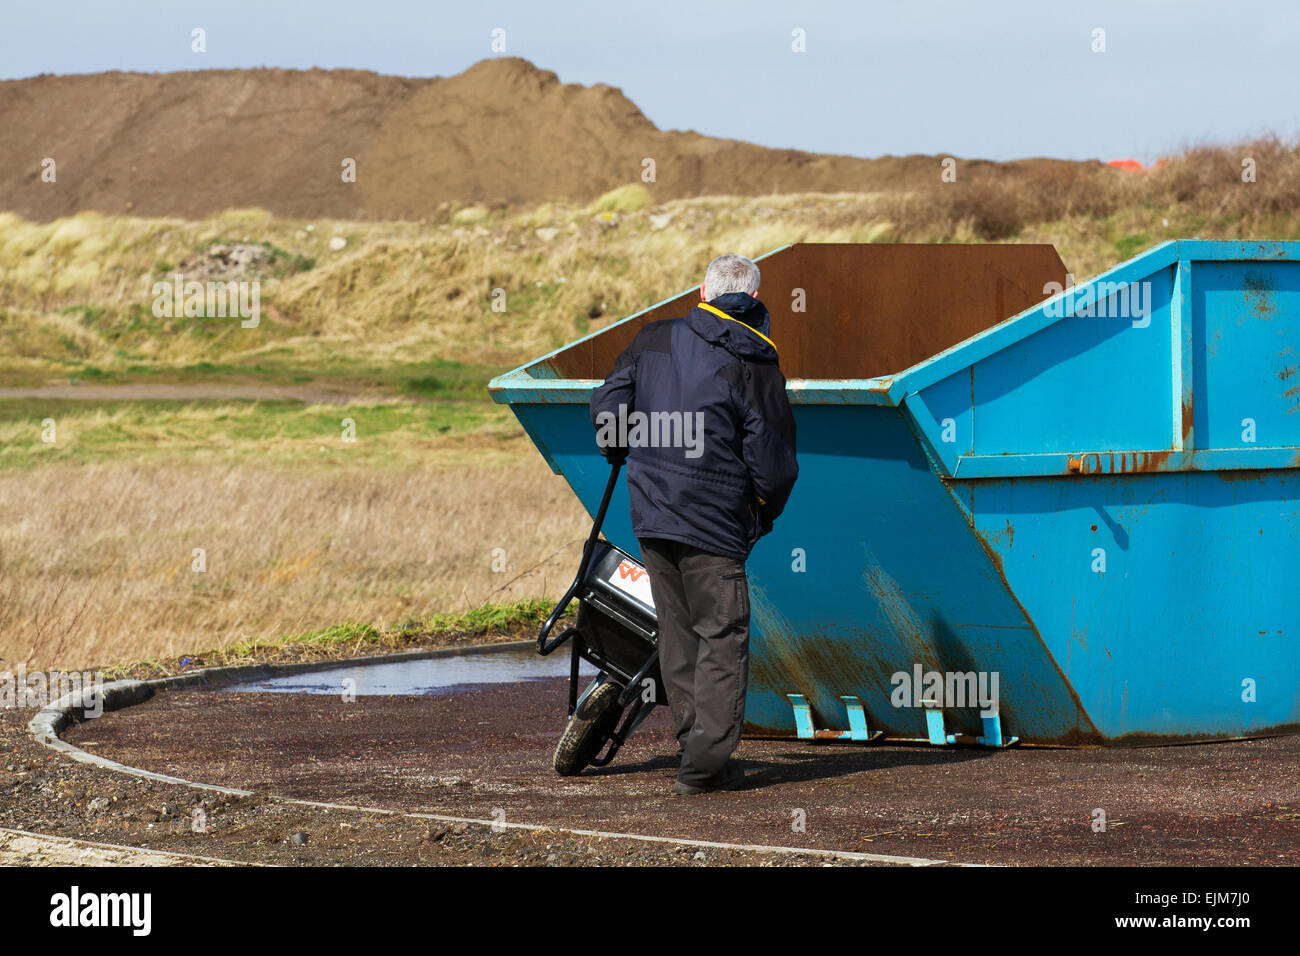 Southport, Sefton, Merseyside, UK. 29th March, 2015. UK Weather.   RSPB Beach 'Pick Up' of sea-borne trash, rubbish & marine debris after overnight gales. Litter and plastic waste washed up on the littered marshes of Ribble Marshside Nature Reserve from the Irish Sea being collected by Marine conservation volunteers. This debris can be collected by wildlife that use it in their nests and are subsequently killed by strangulation or by swallowing smaller particles of the harmful waste plastics. Stock Photo